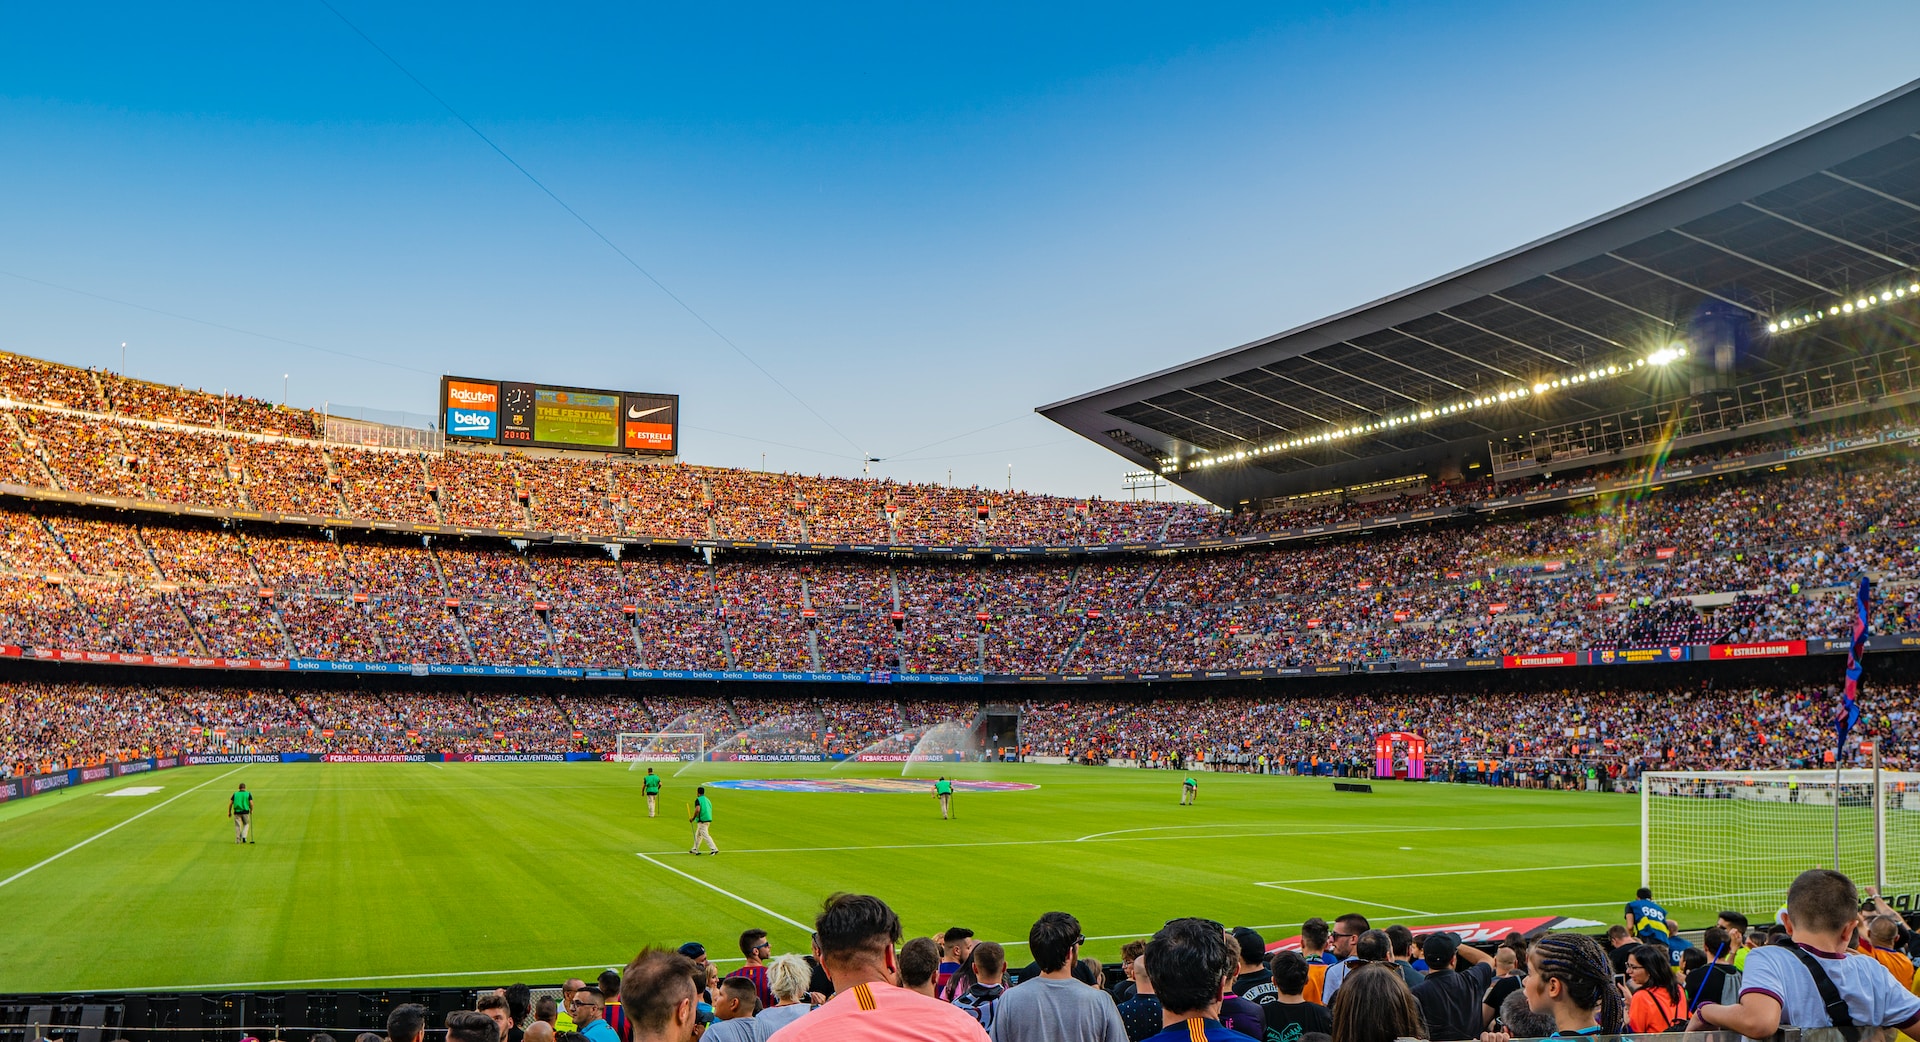 Camp Nou, a top football stadium in Barcelona that attracts sports fans from around the world. (photo: Shai Pal)